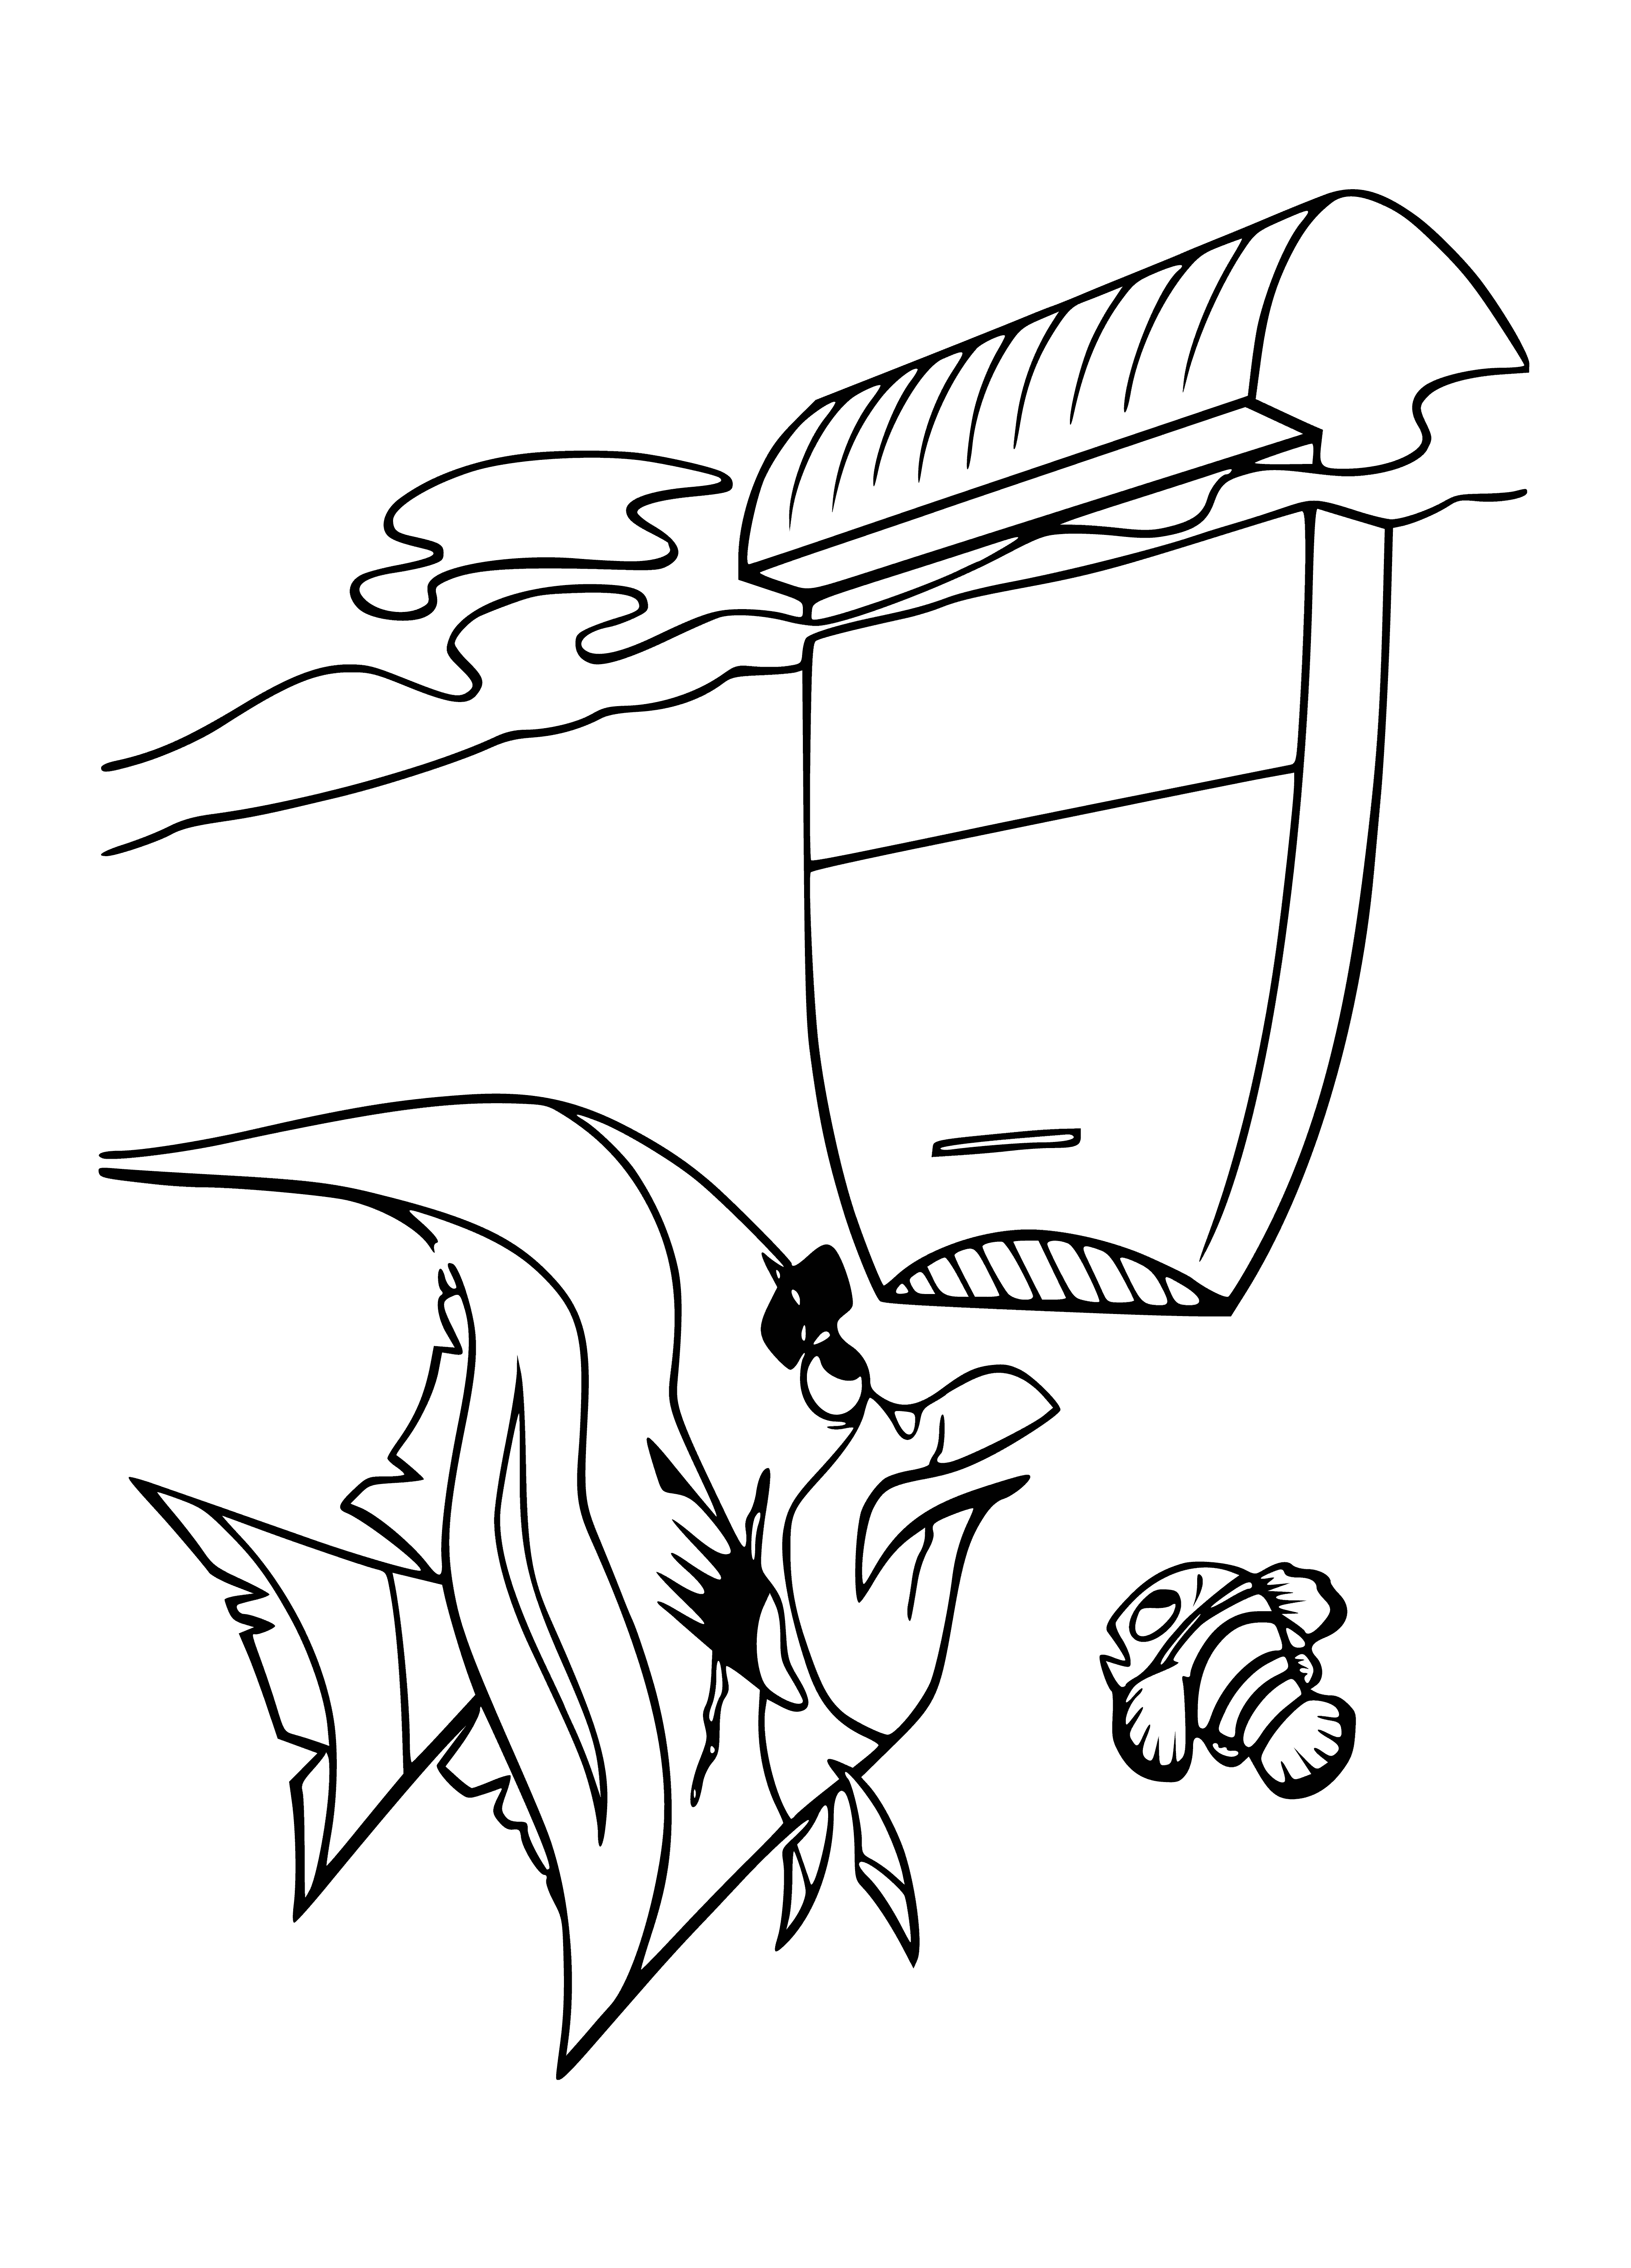 coloring page: Blue water filter pours water into cup, yellow fish on front. #waterfilter #fish #blue